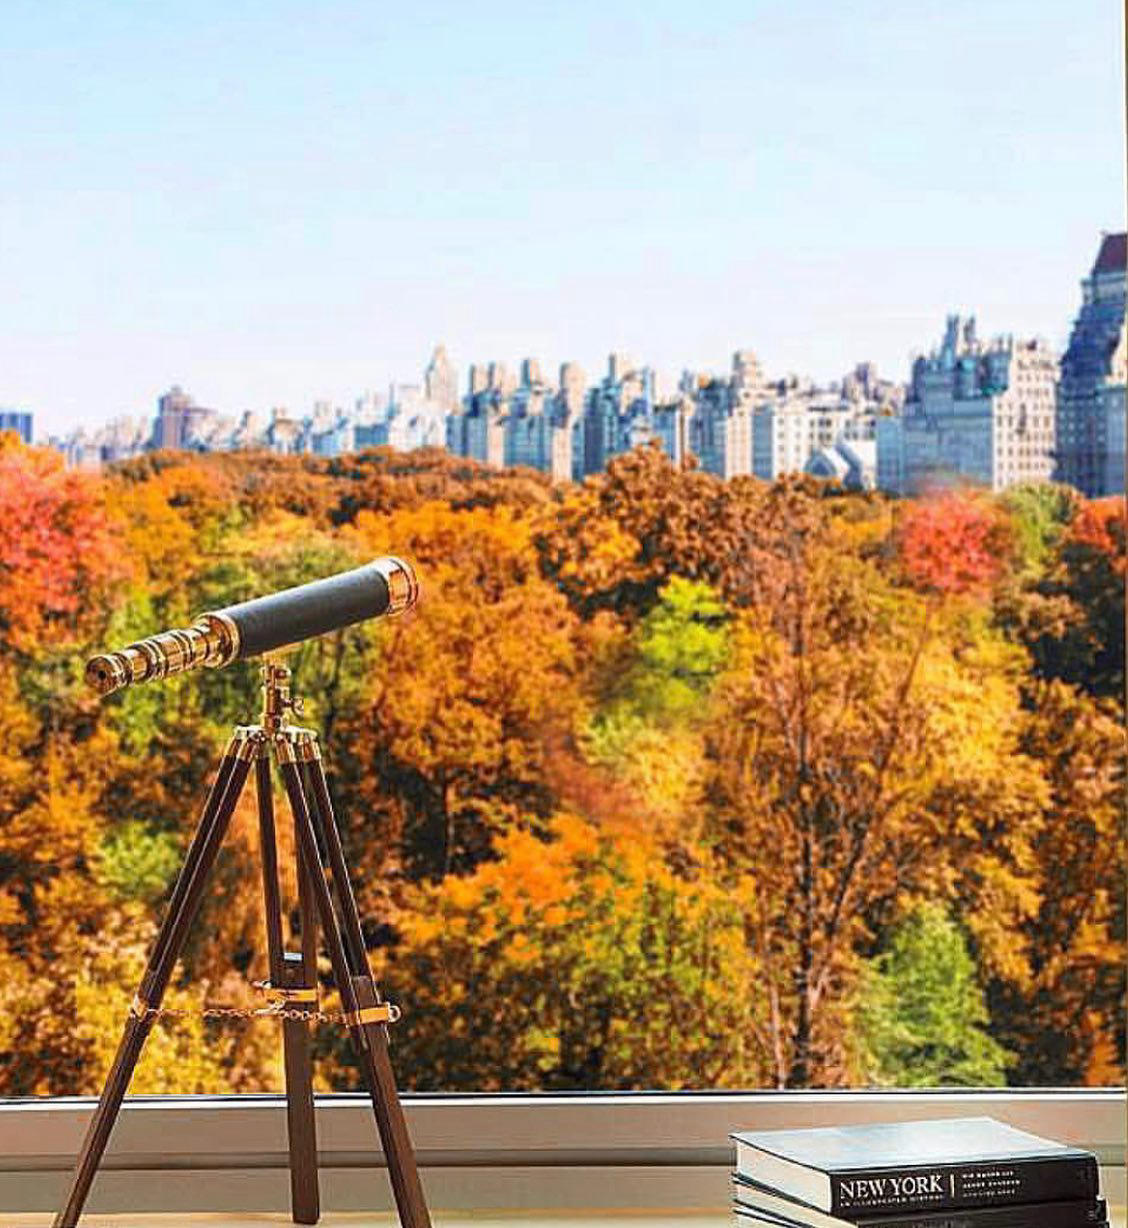 The Ritz-Carlton New York, Central Park - Tis’ the season to fall in love with New York